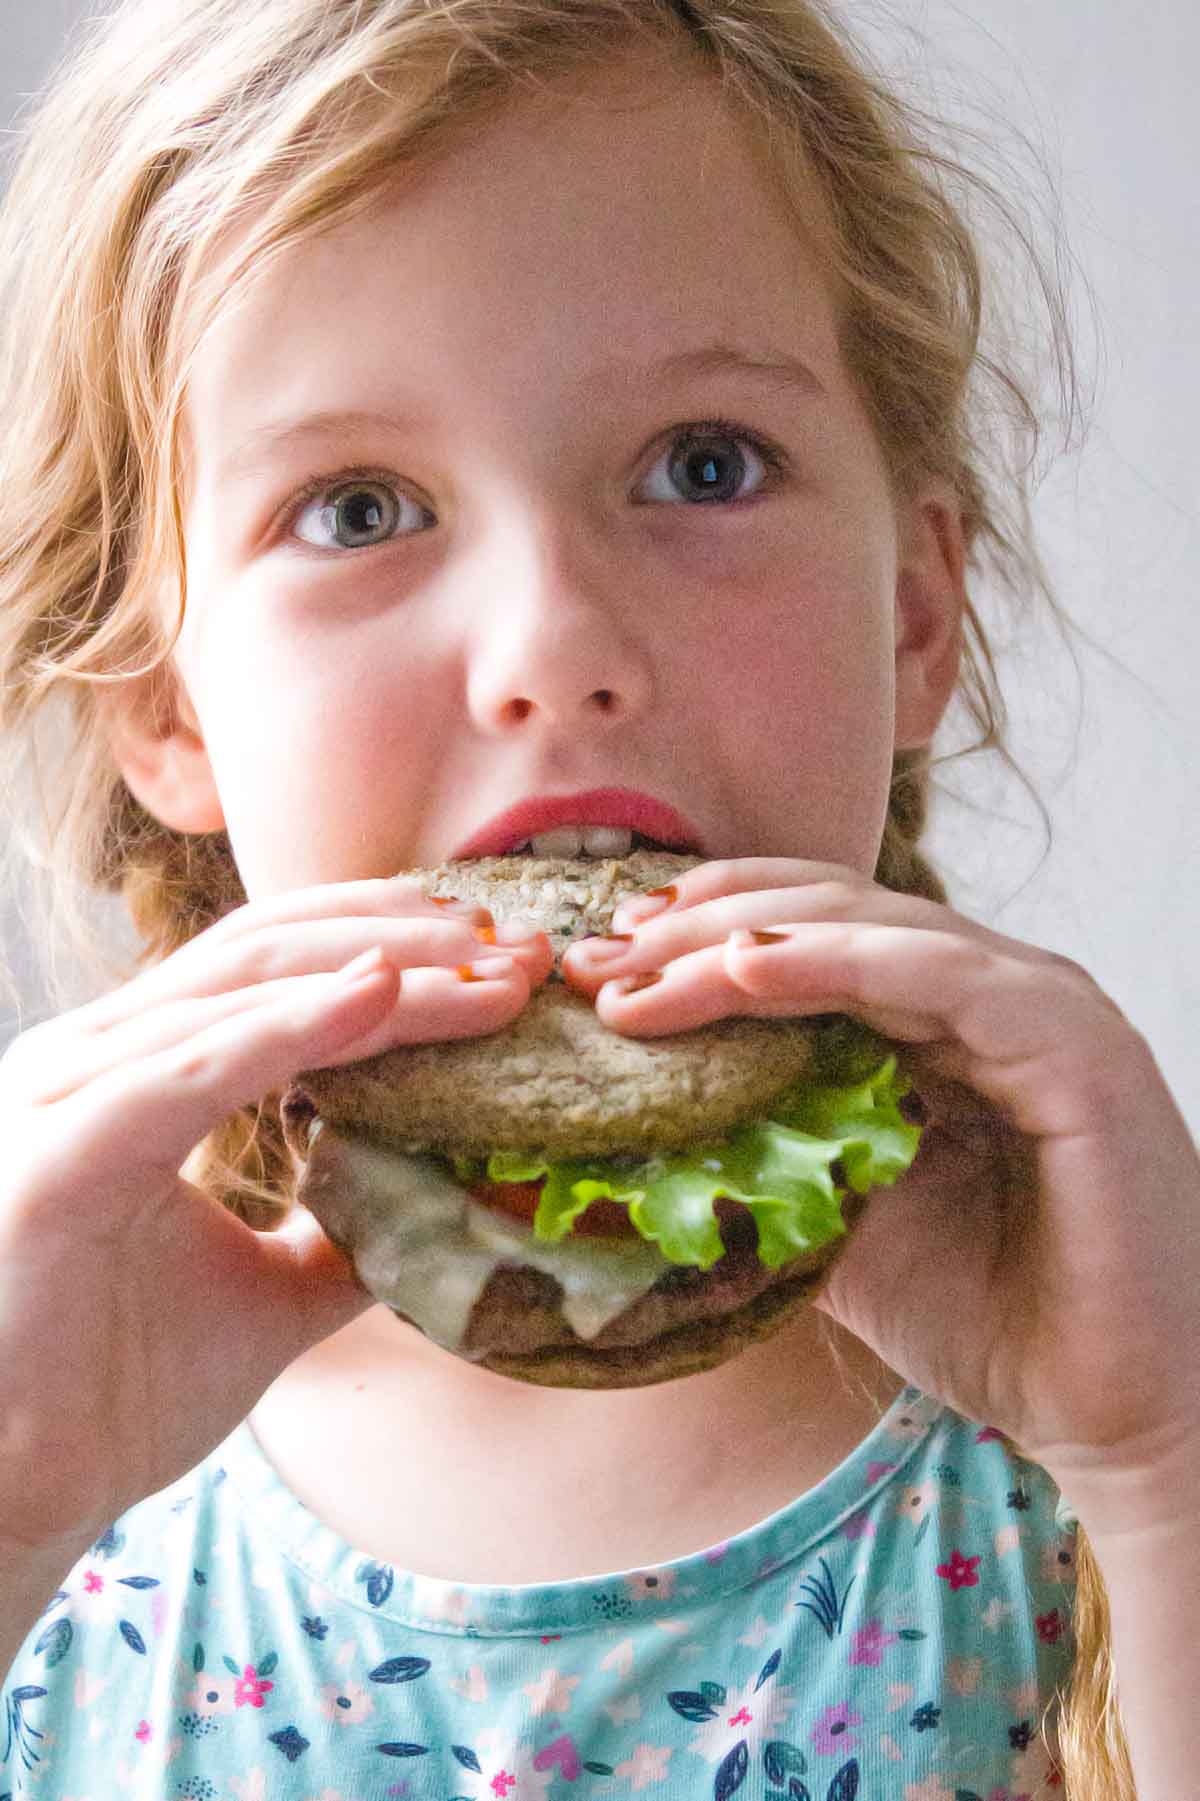 Girl biting into hamburger with keto bread rolls made with coconut flour